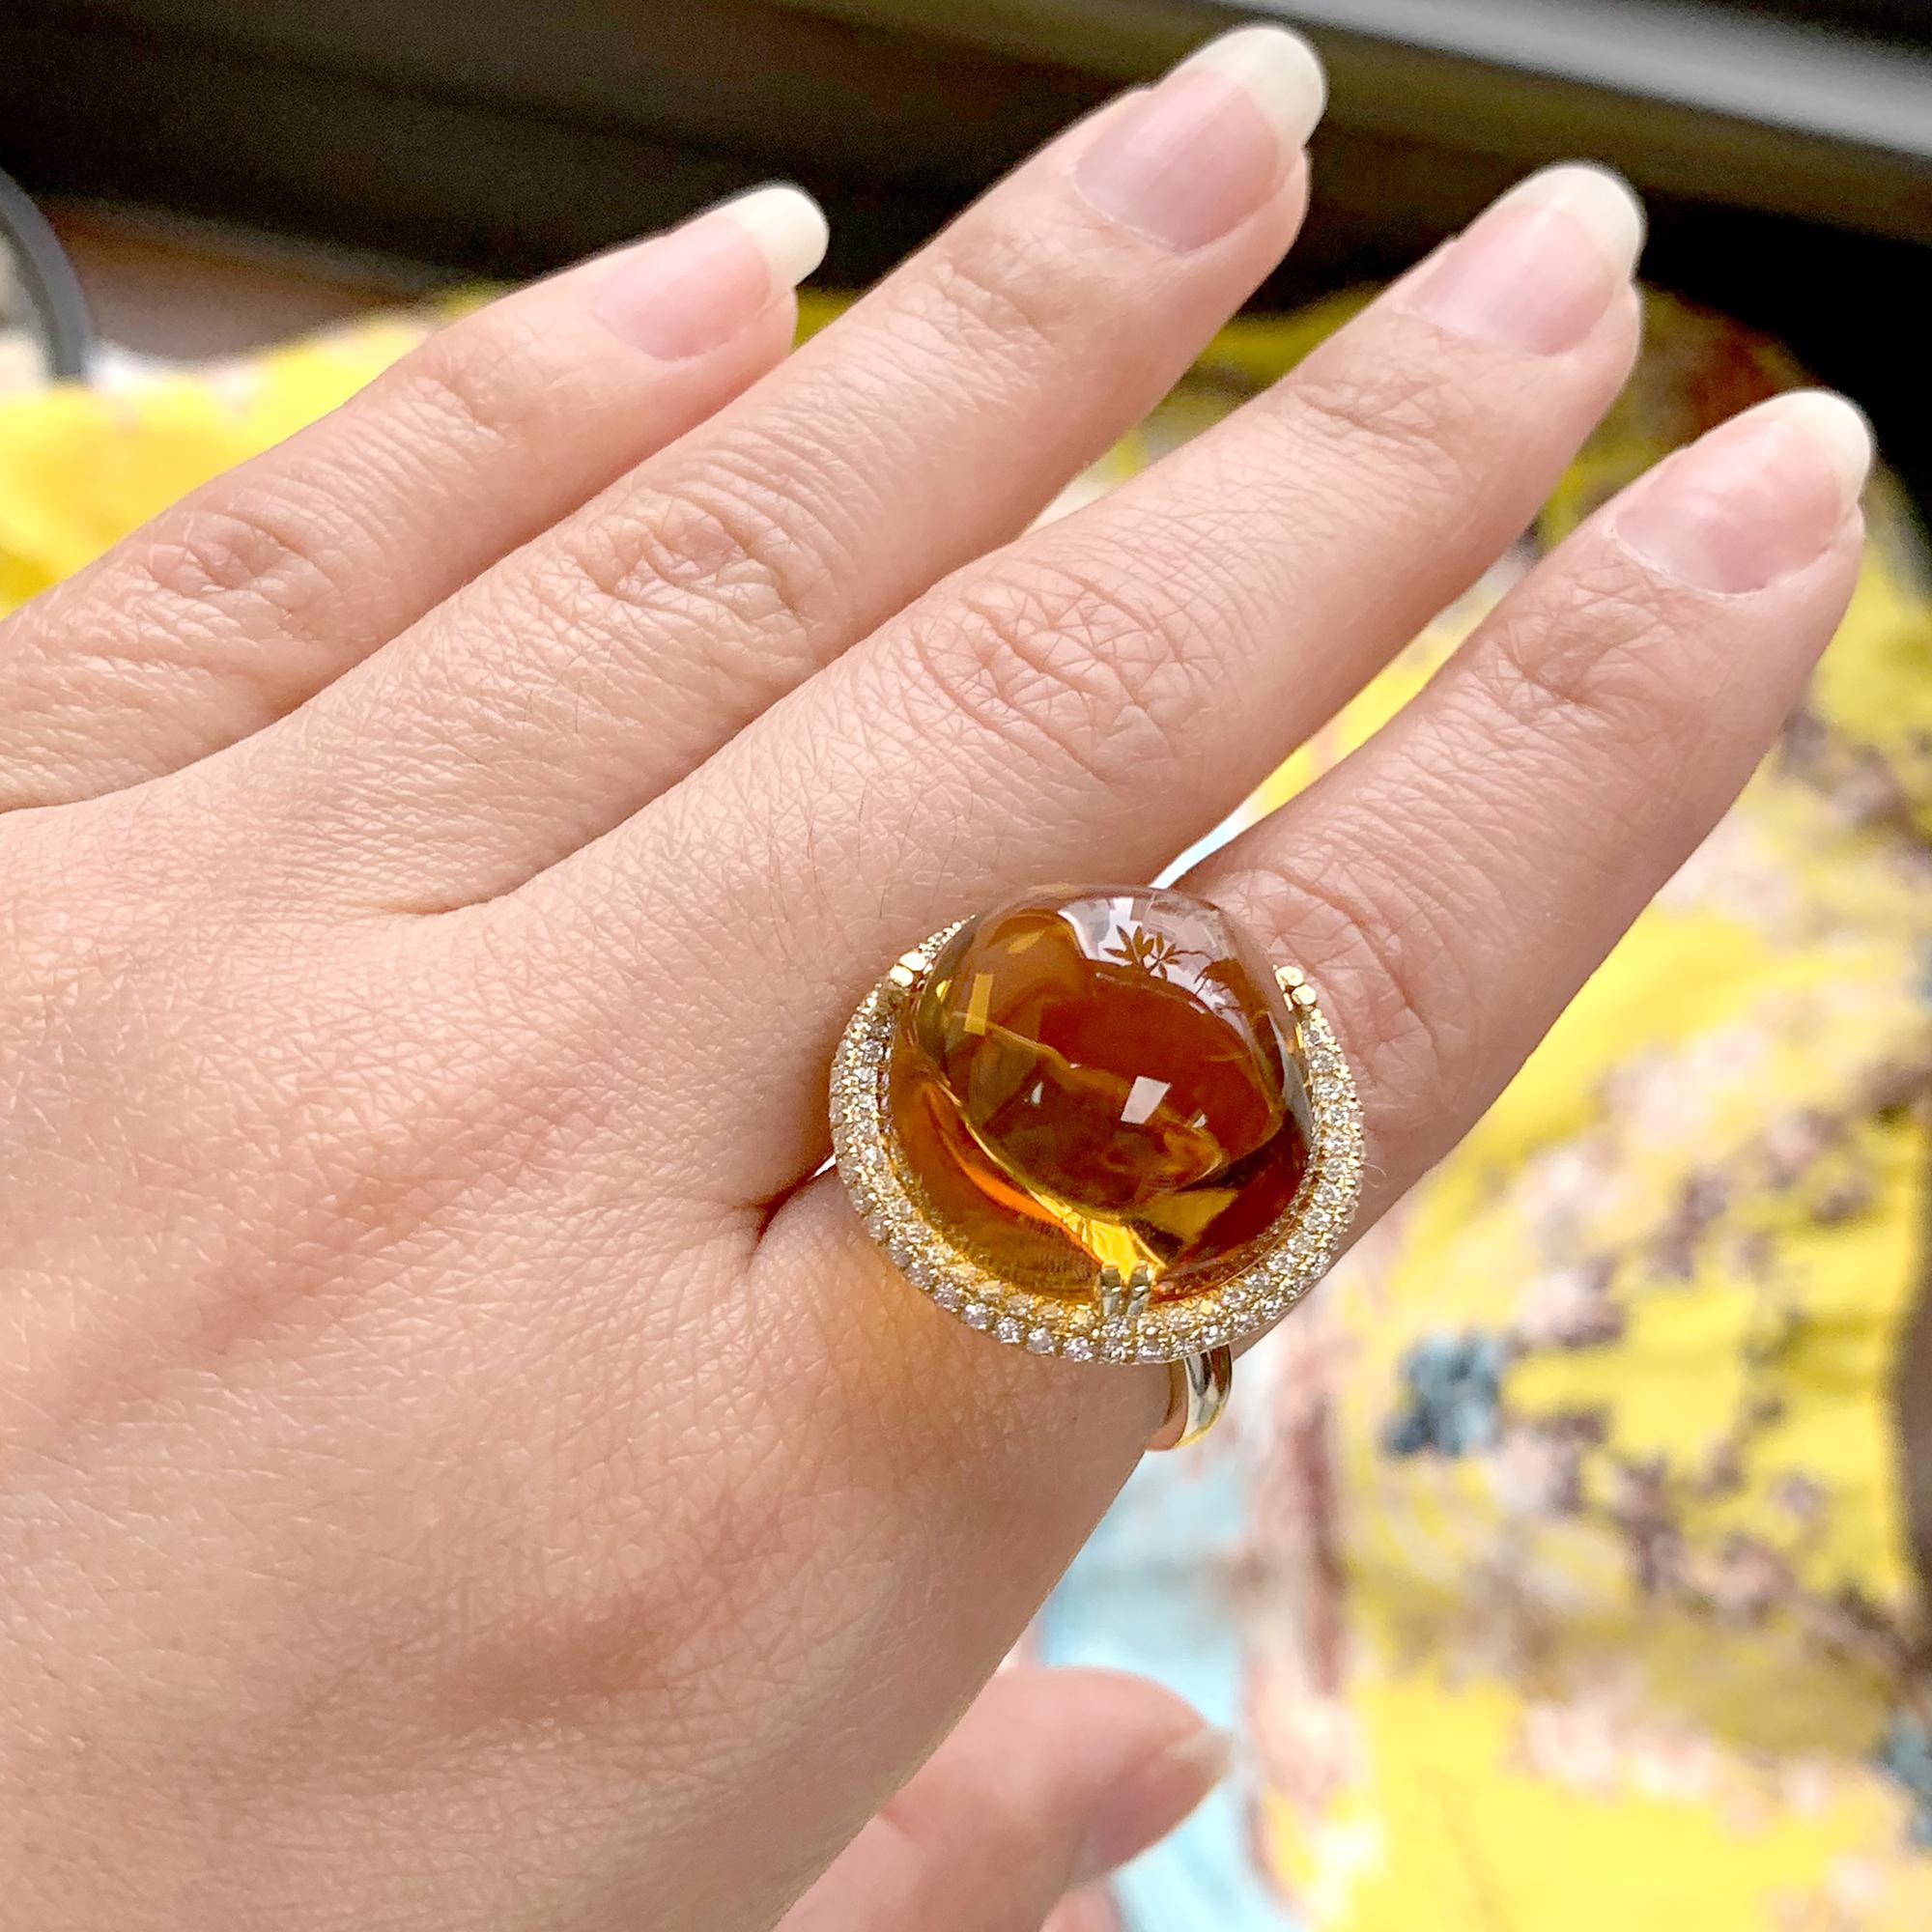 Citrine Uneven Round Cabochon Ring in 18K Yellow Gold with Diamonds, from 'Rock 'N Roll' Collection. Extensive collection of big and bold pieces. Like the music, this Rock ‘n Roll collection is electric in color and very stimulating to the eye.